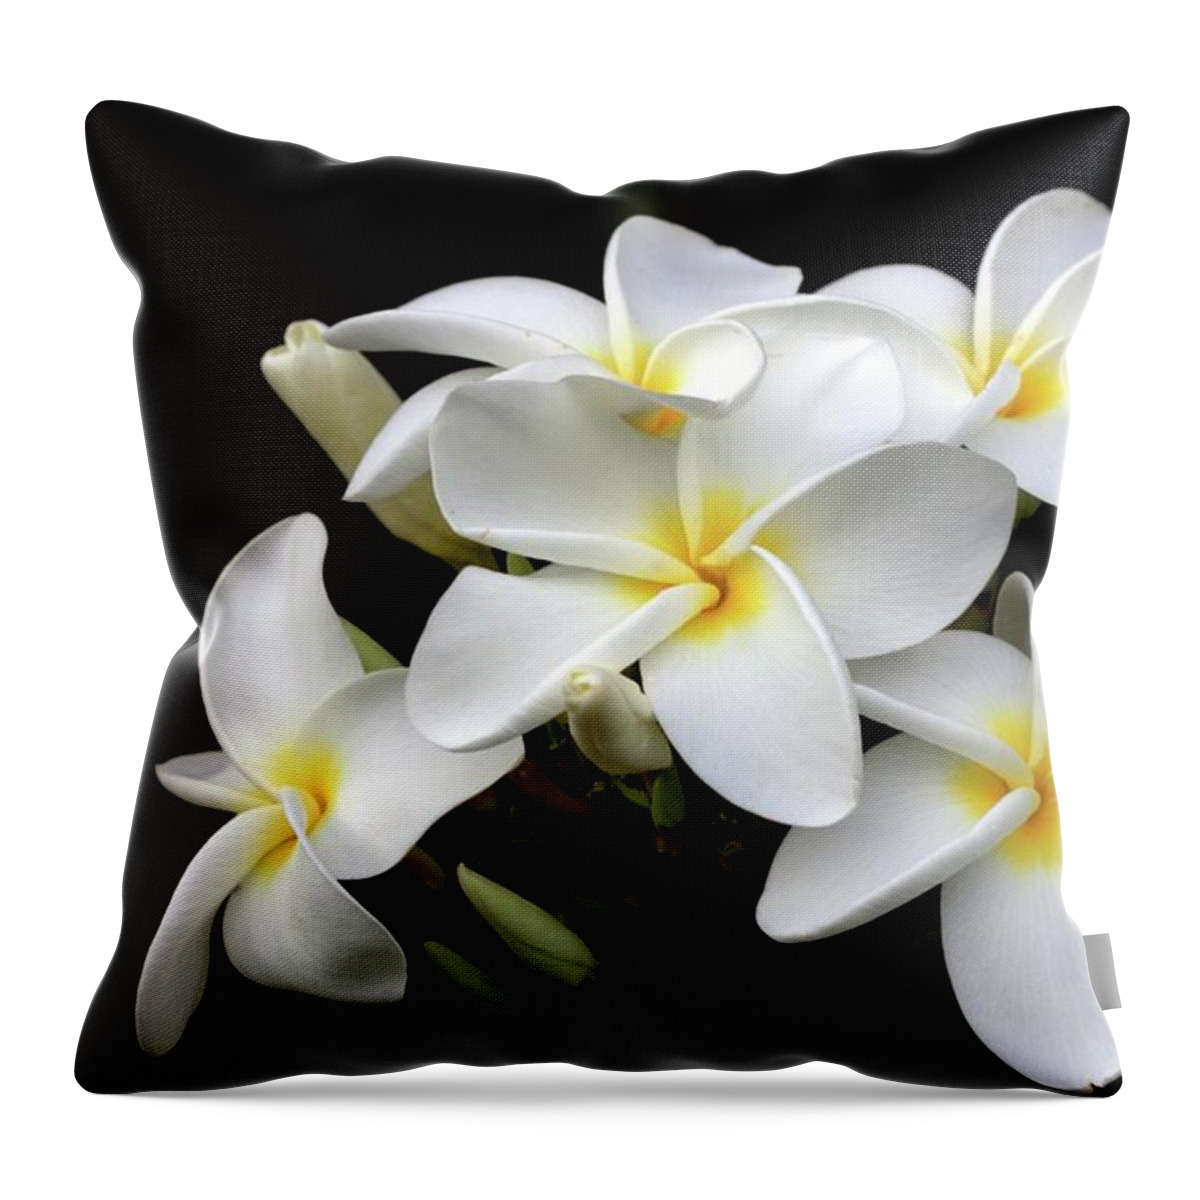 Bud Throw Pillow featuring the photograph Plumeria Flower by Photos By By Deb Alperin